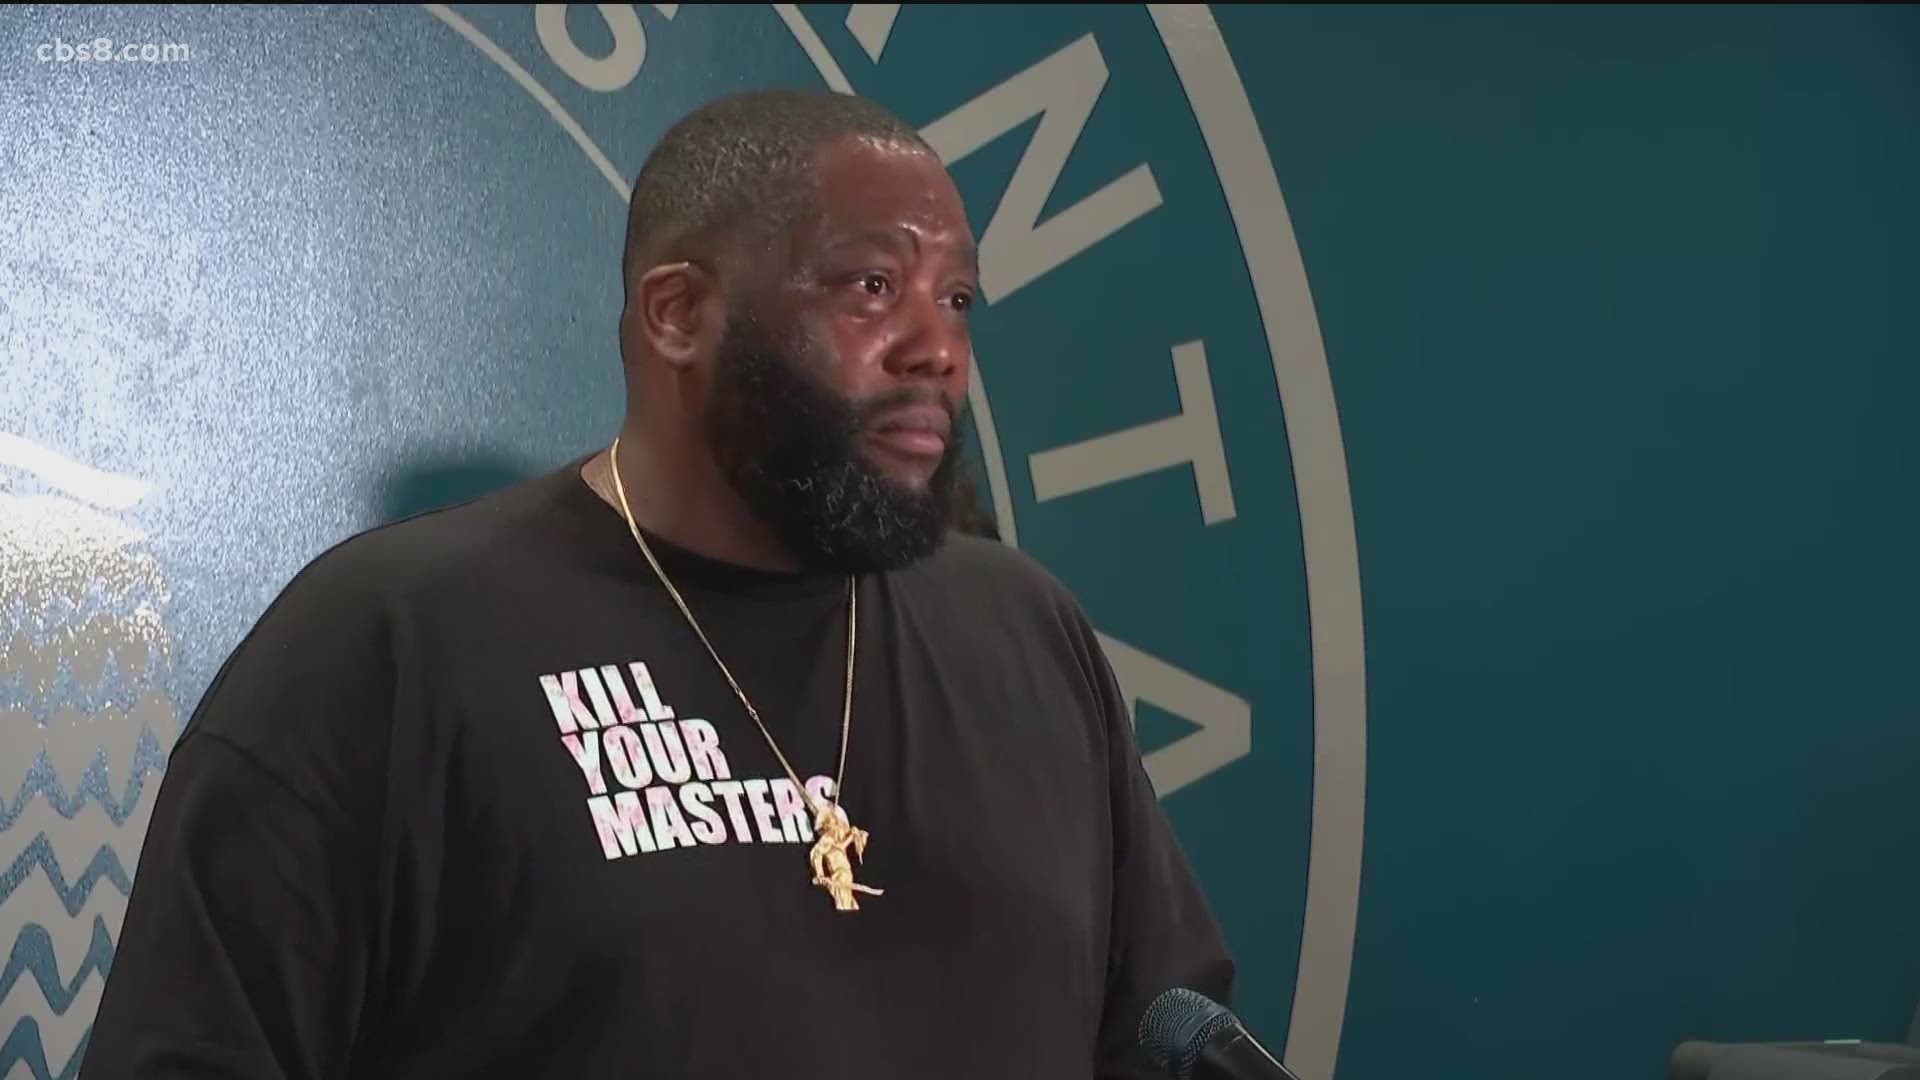 As protests in Atlanta escalated toward looting and clashes with police, Run the Jewels' Killer Mike appeared at the mayor's press conference to deliver message.